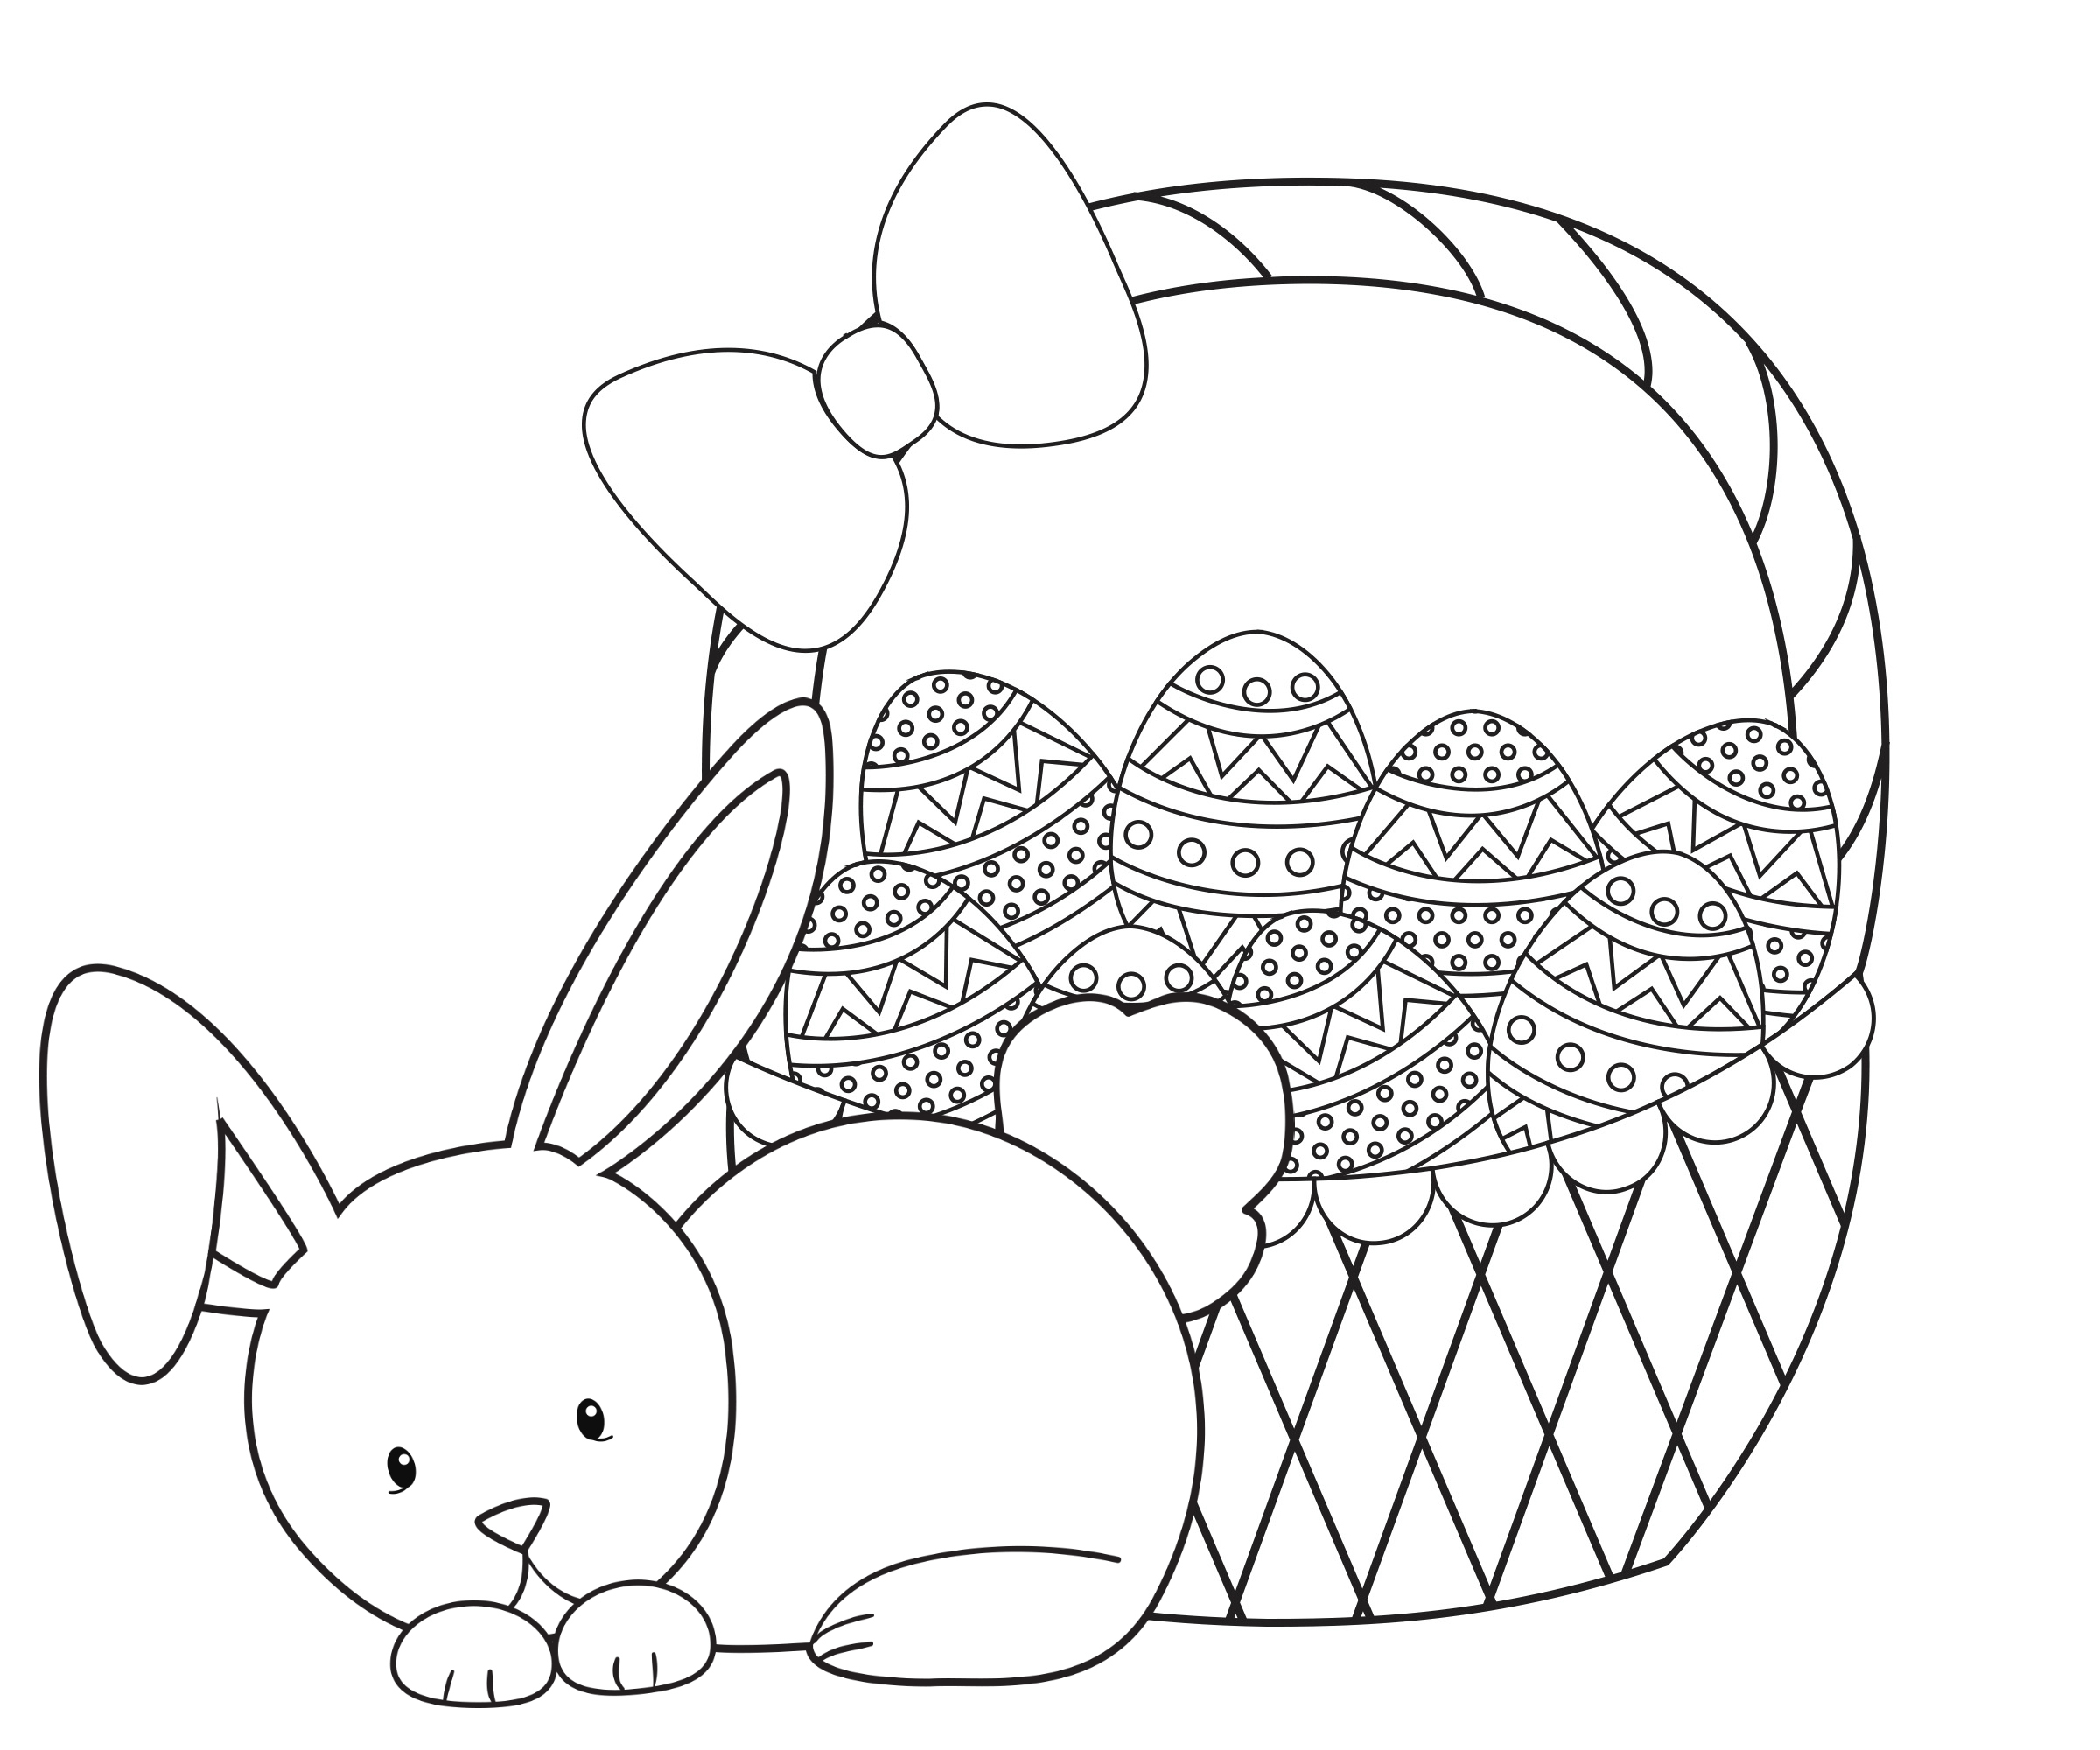 Resurrection Coloring Pages For Preschoolers Easter Coloring Pages Religious Pathtalk